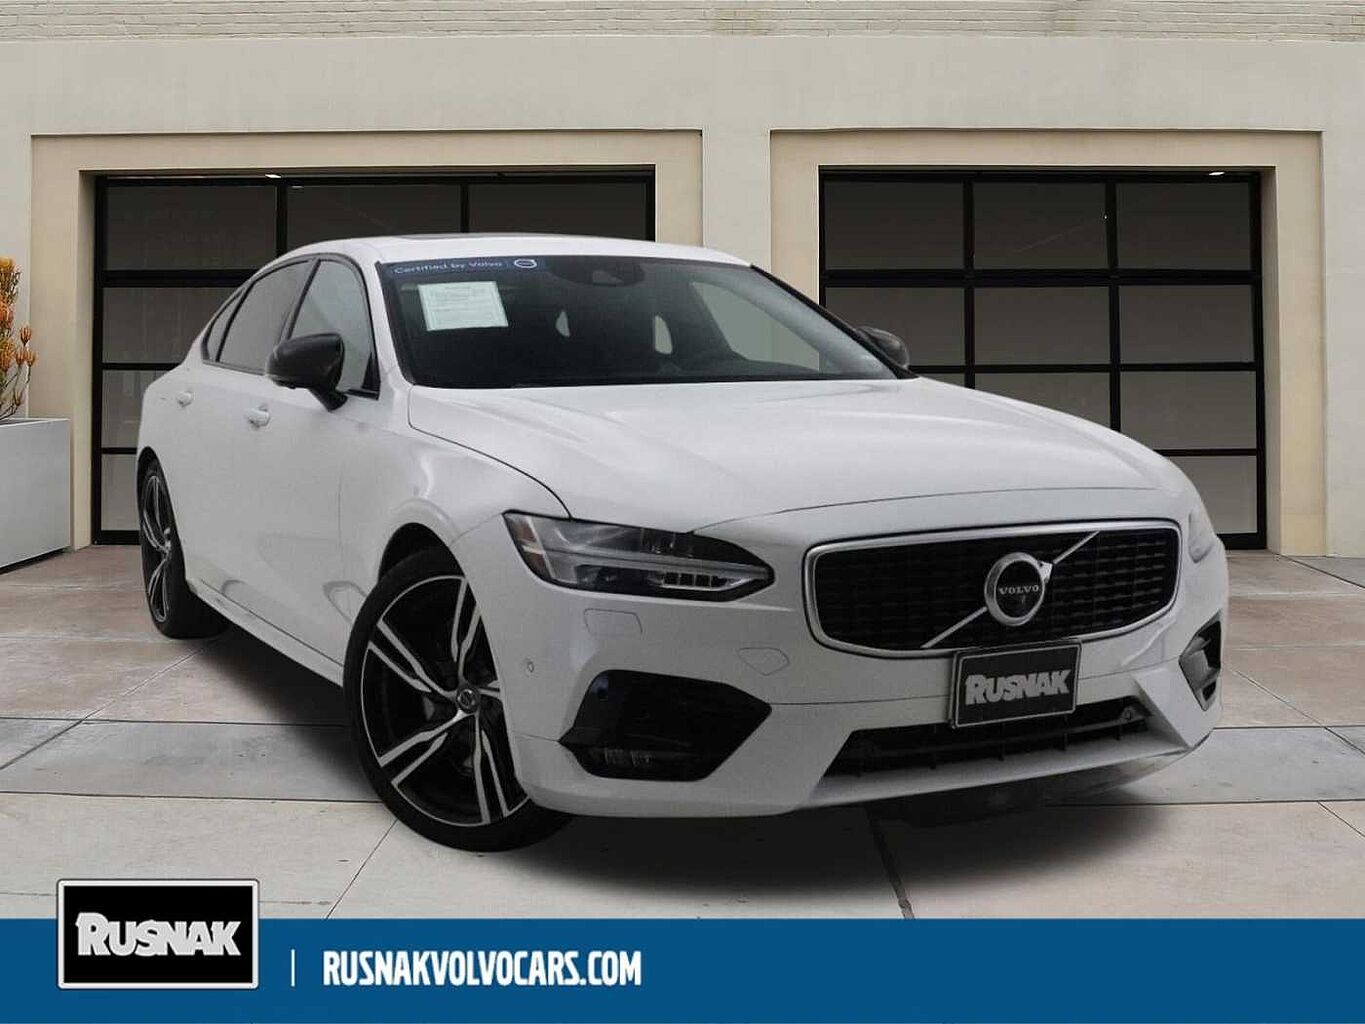 Pre-owned Volvo S90 Cars for Sale on Certified by Volvo | Volvo